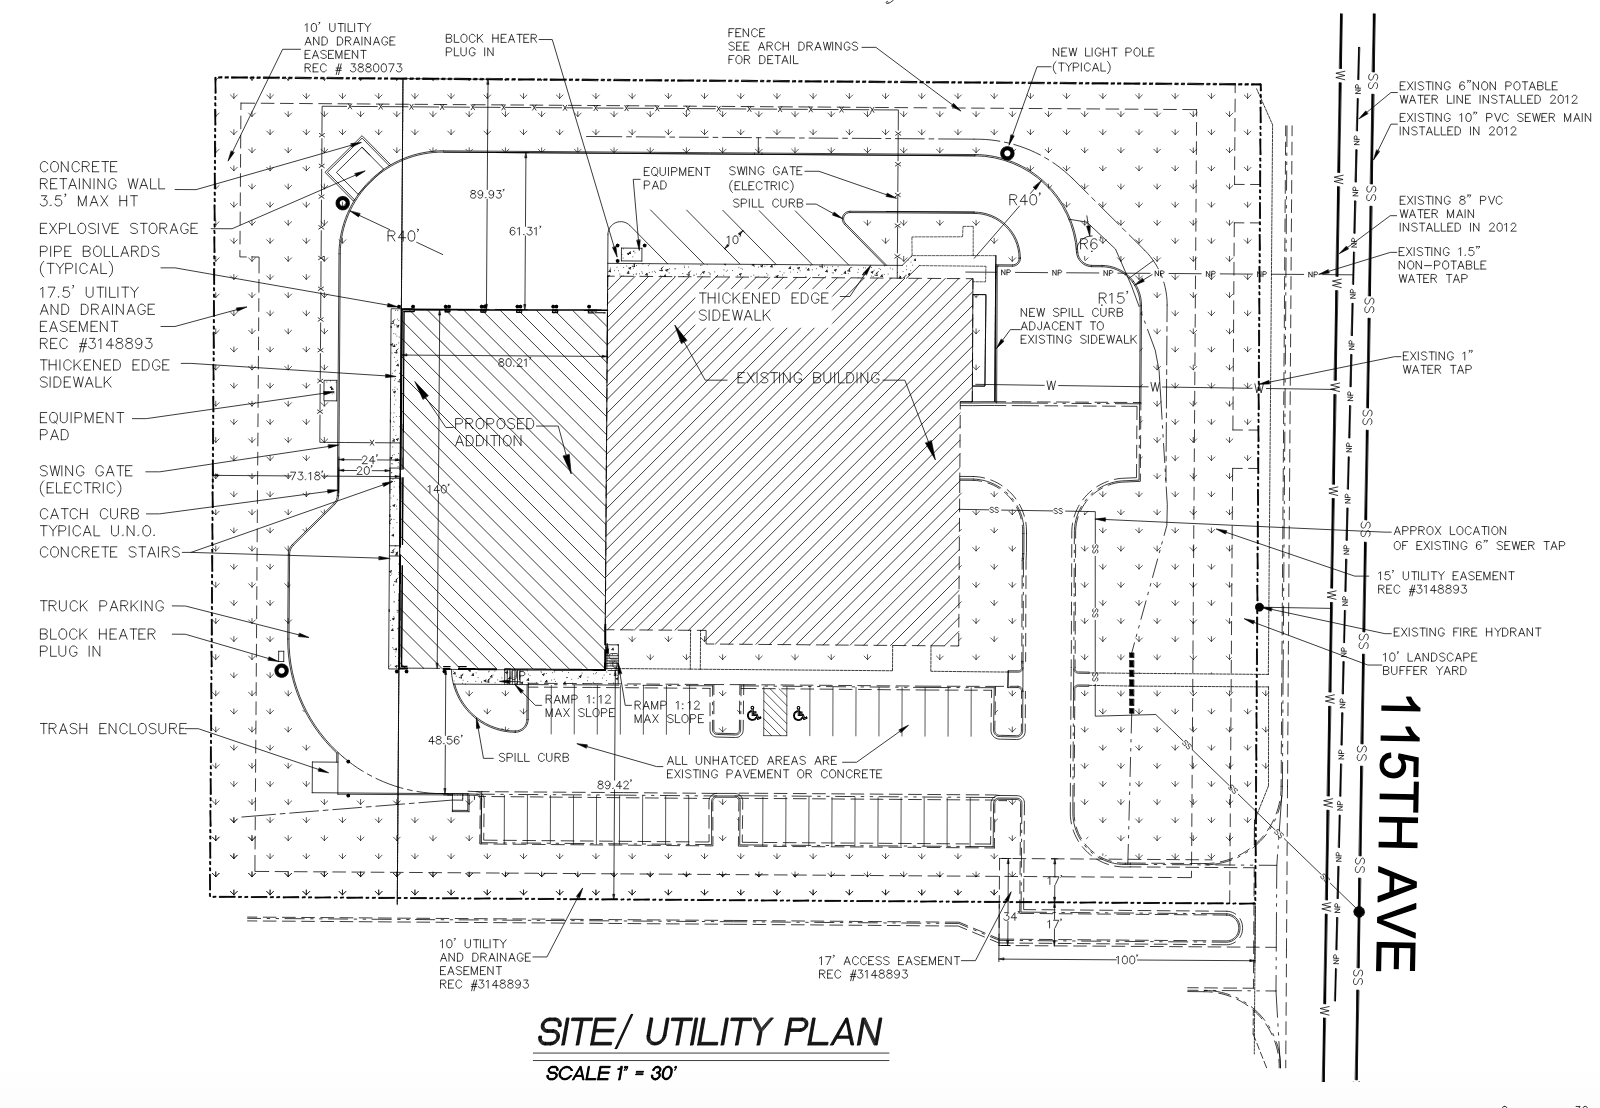 Site plan for addition to Weld County Forensic Lab in Greeley, CO